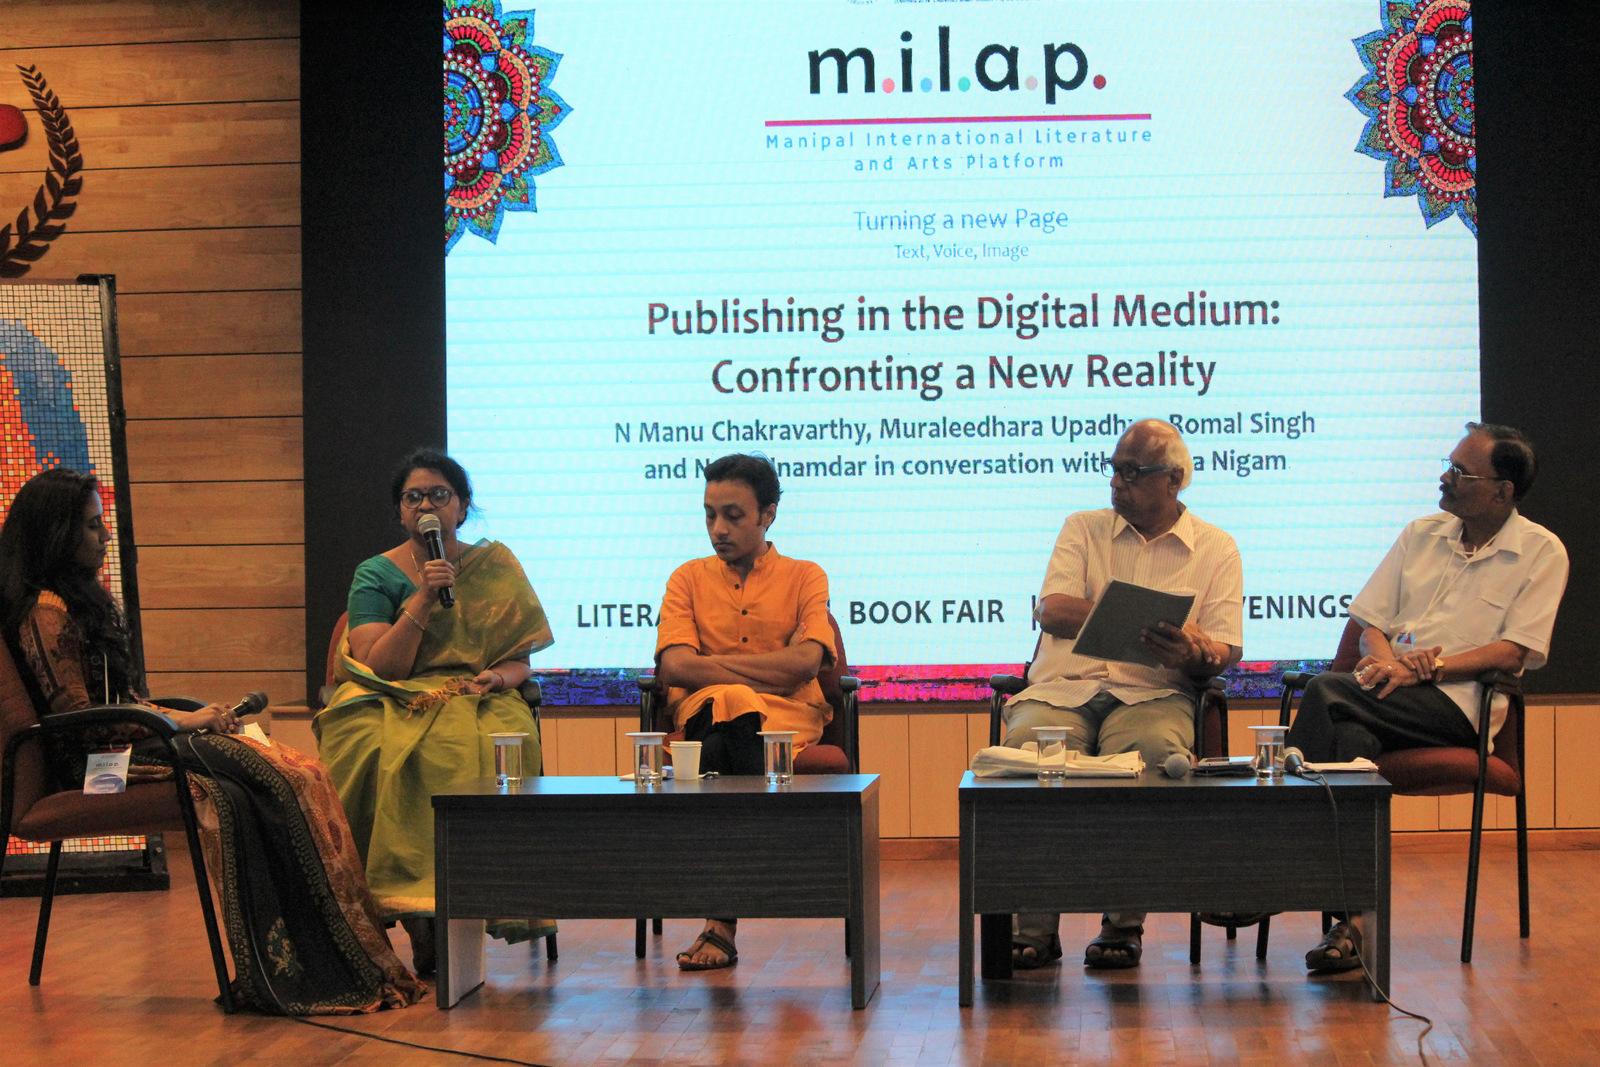 2019 edition of MILAP end with lively discussions